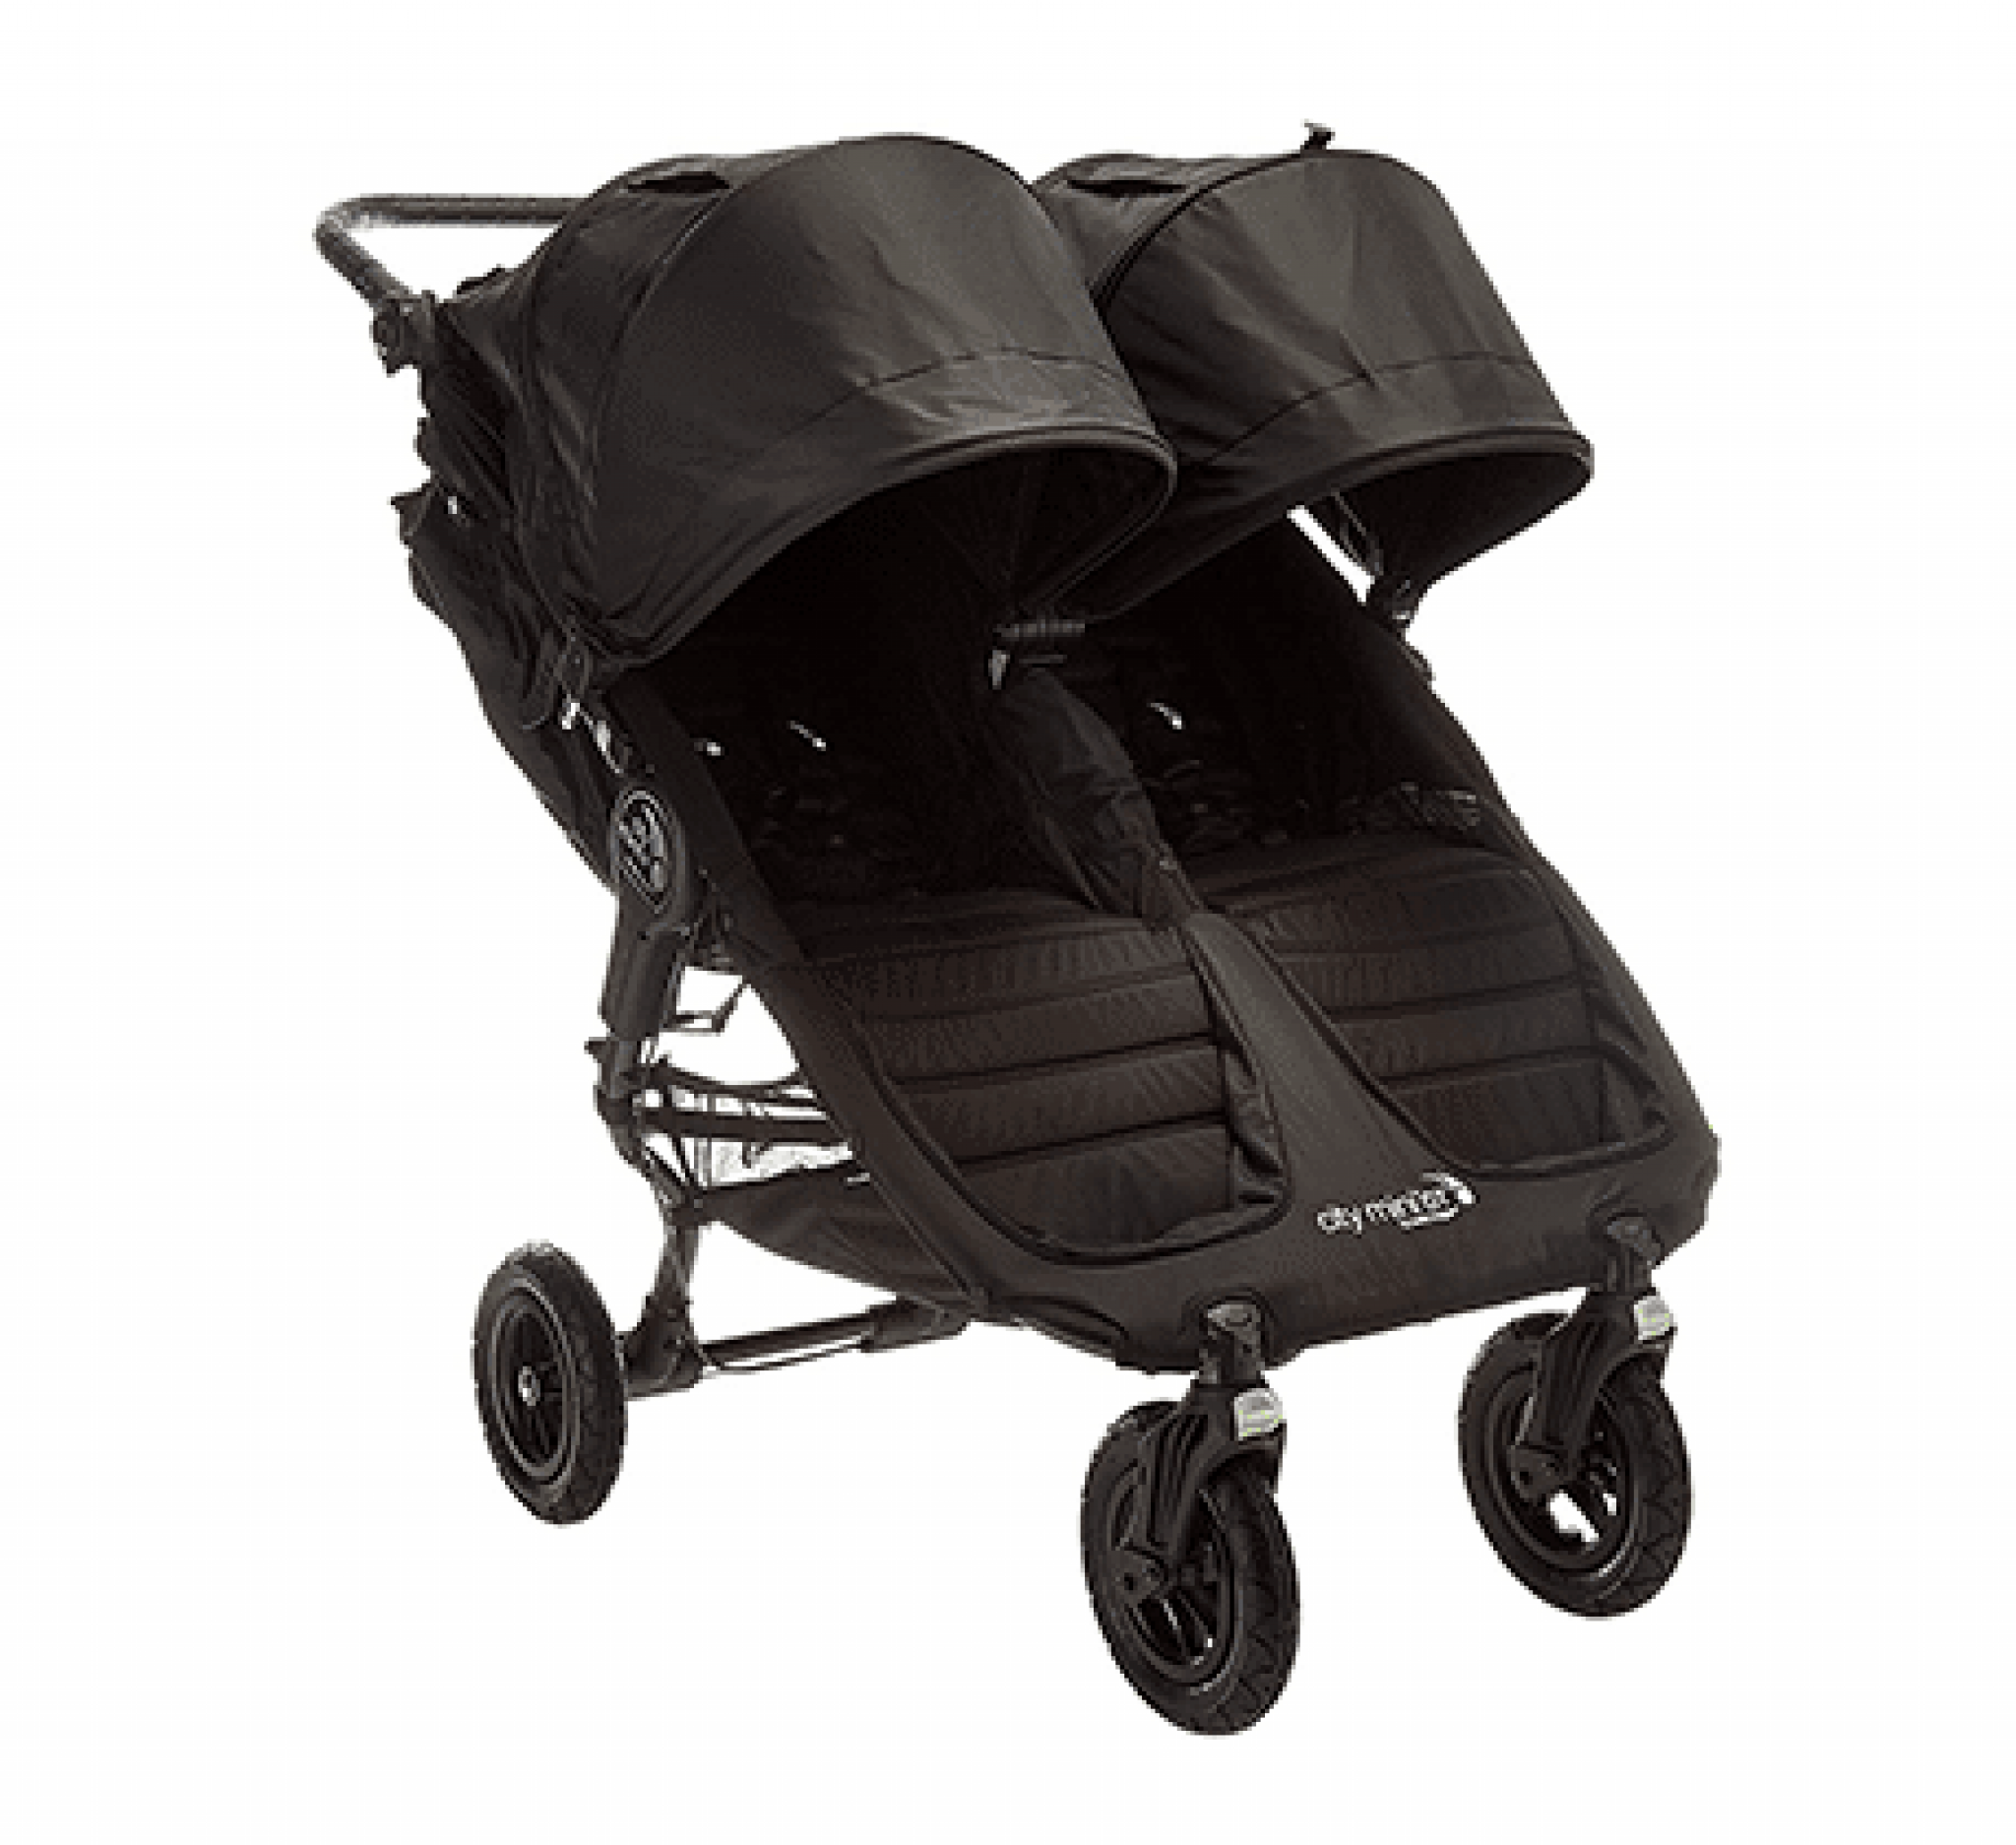 Baby Jogger City Mini GT Double Review for 2019 | Traveling Baby